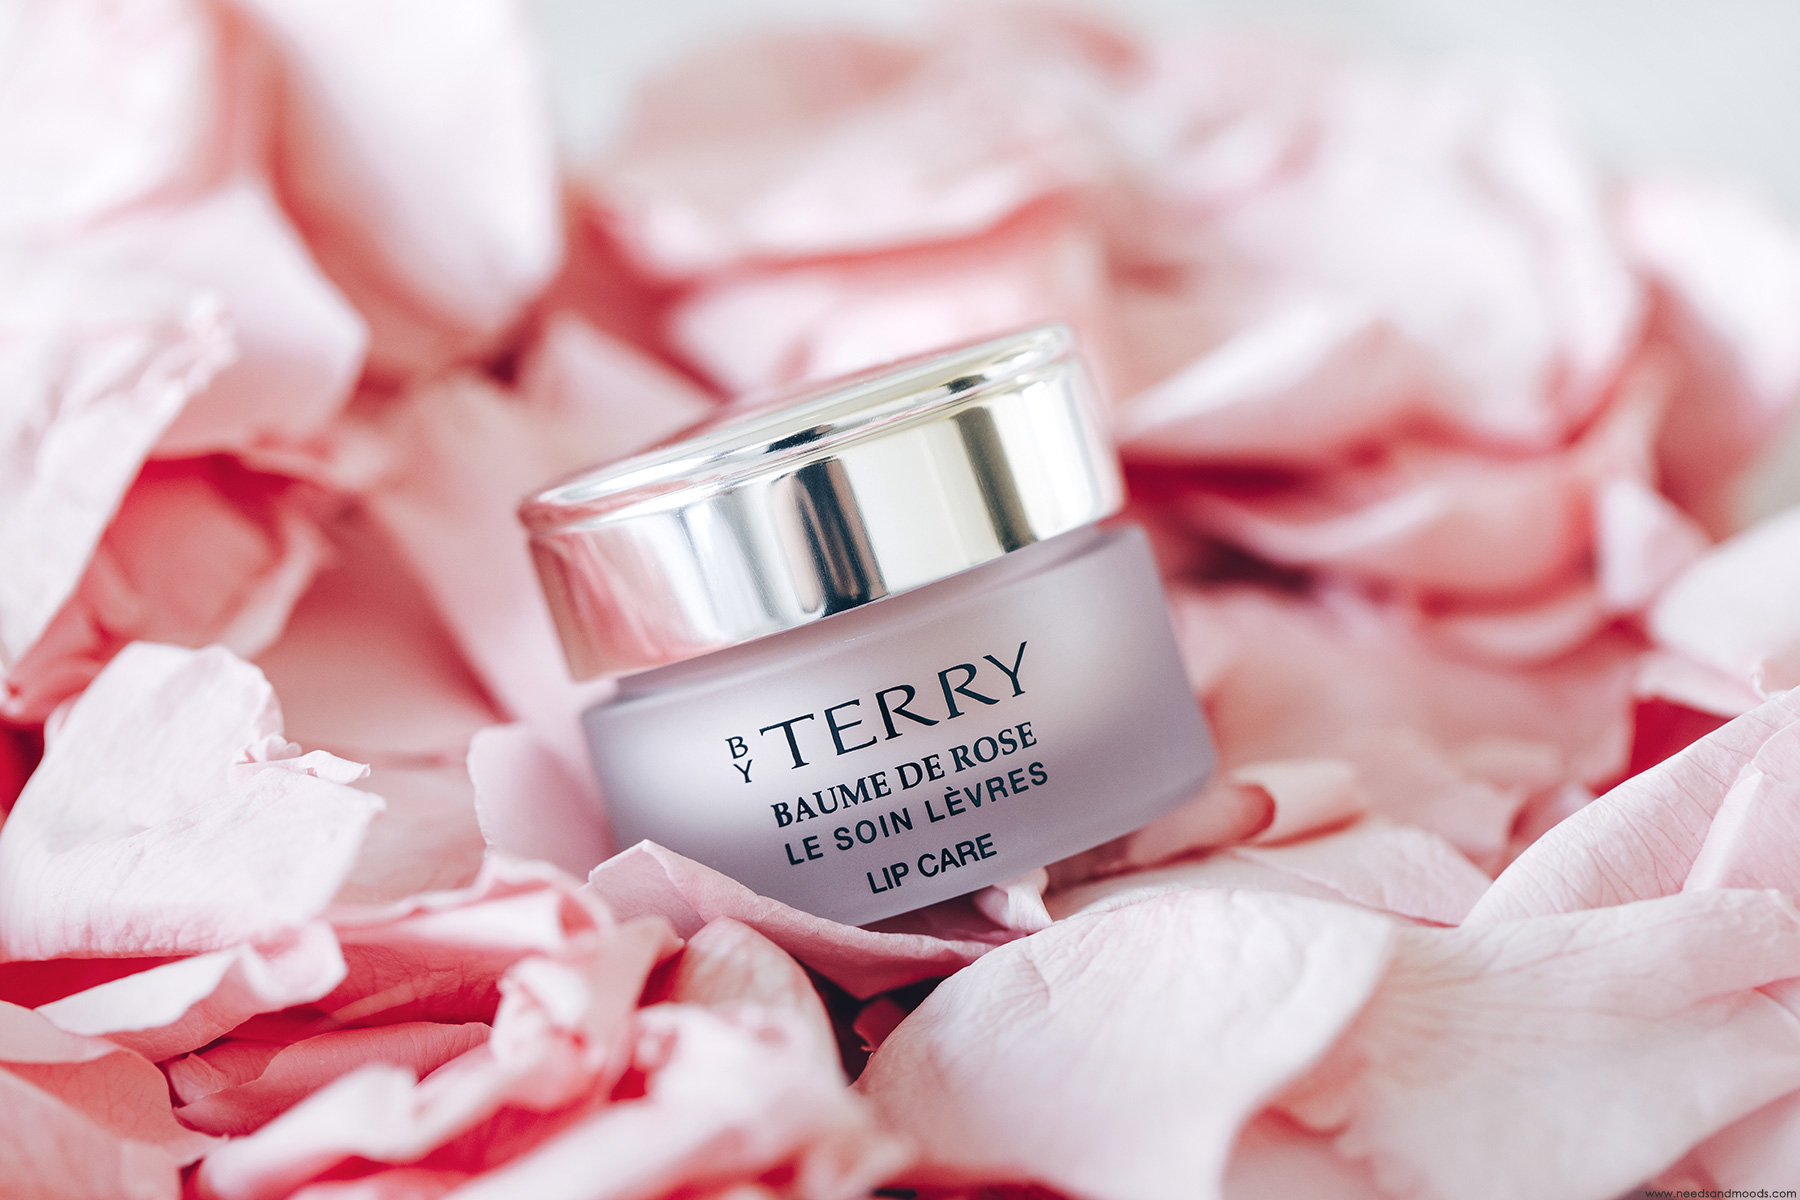 by terry baume de rose